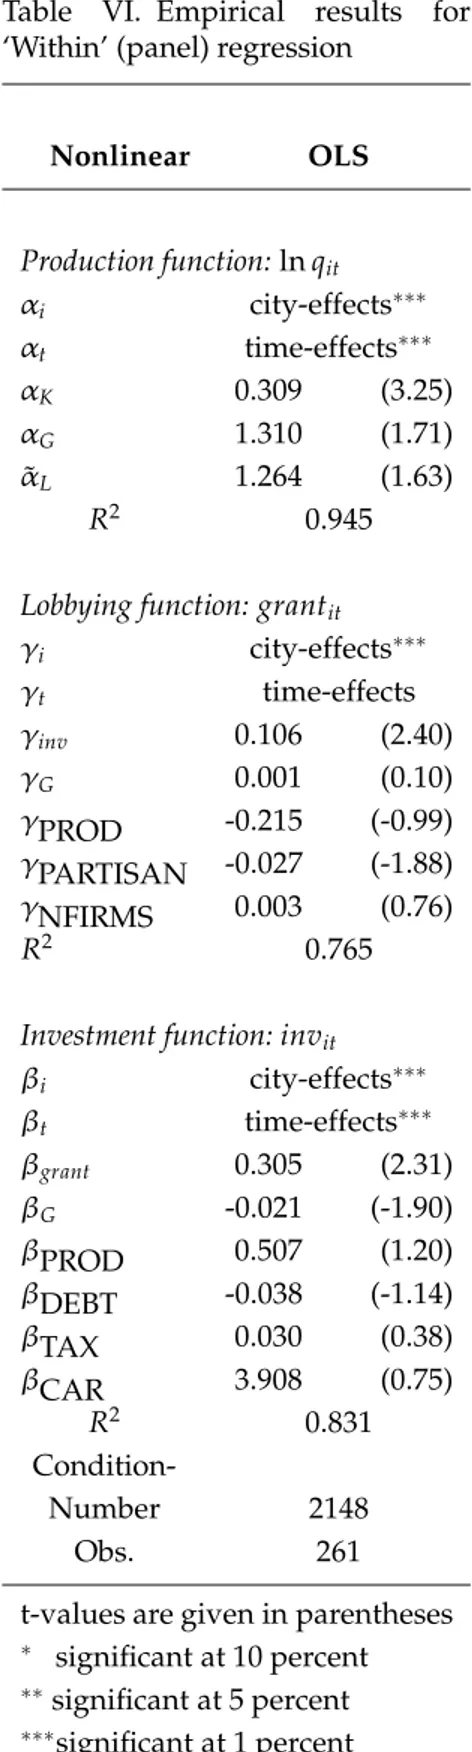 Table VI. Empirical results for